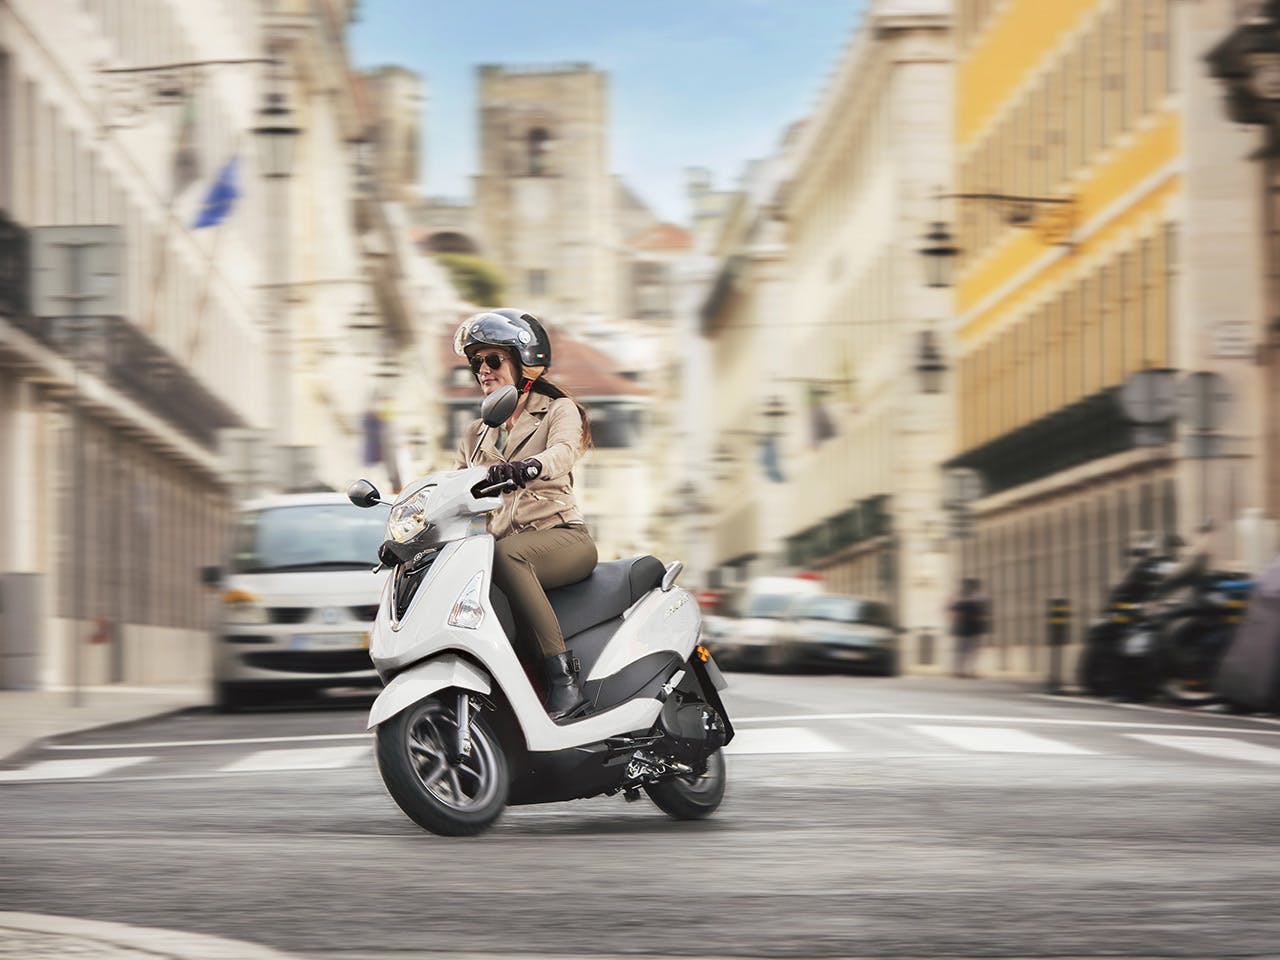 Yamaha D'elight 125 scooter in Milky White riding down city street